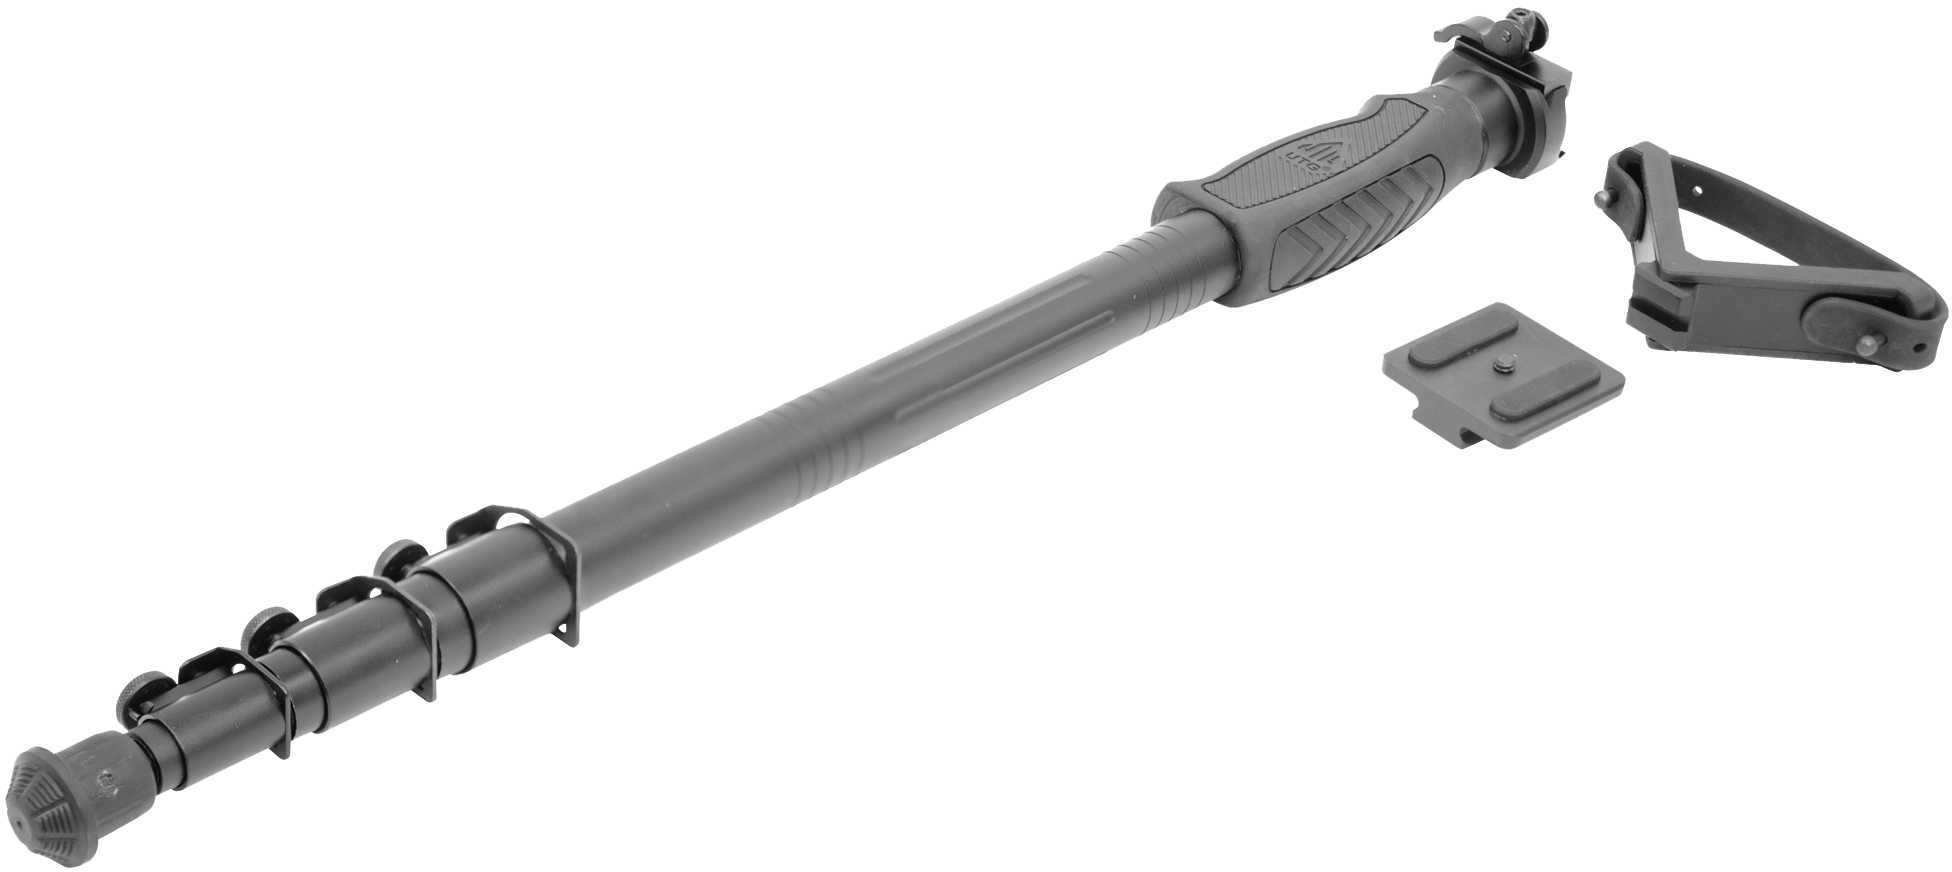 Leapers, Inc. Monopod With V-Rest And Camera Adaptor Md: Tl-MP150Q